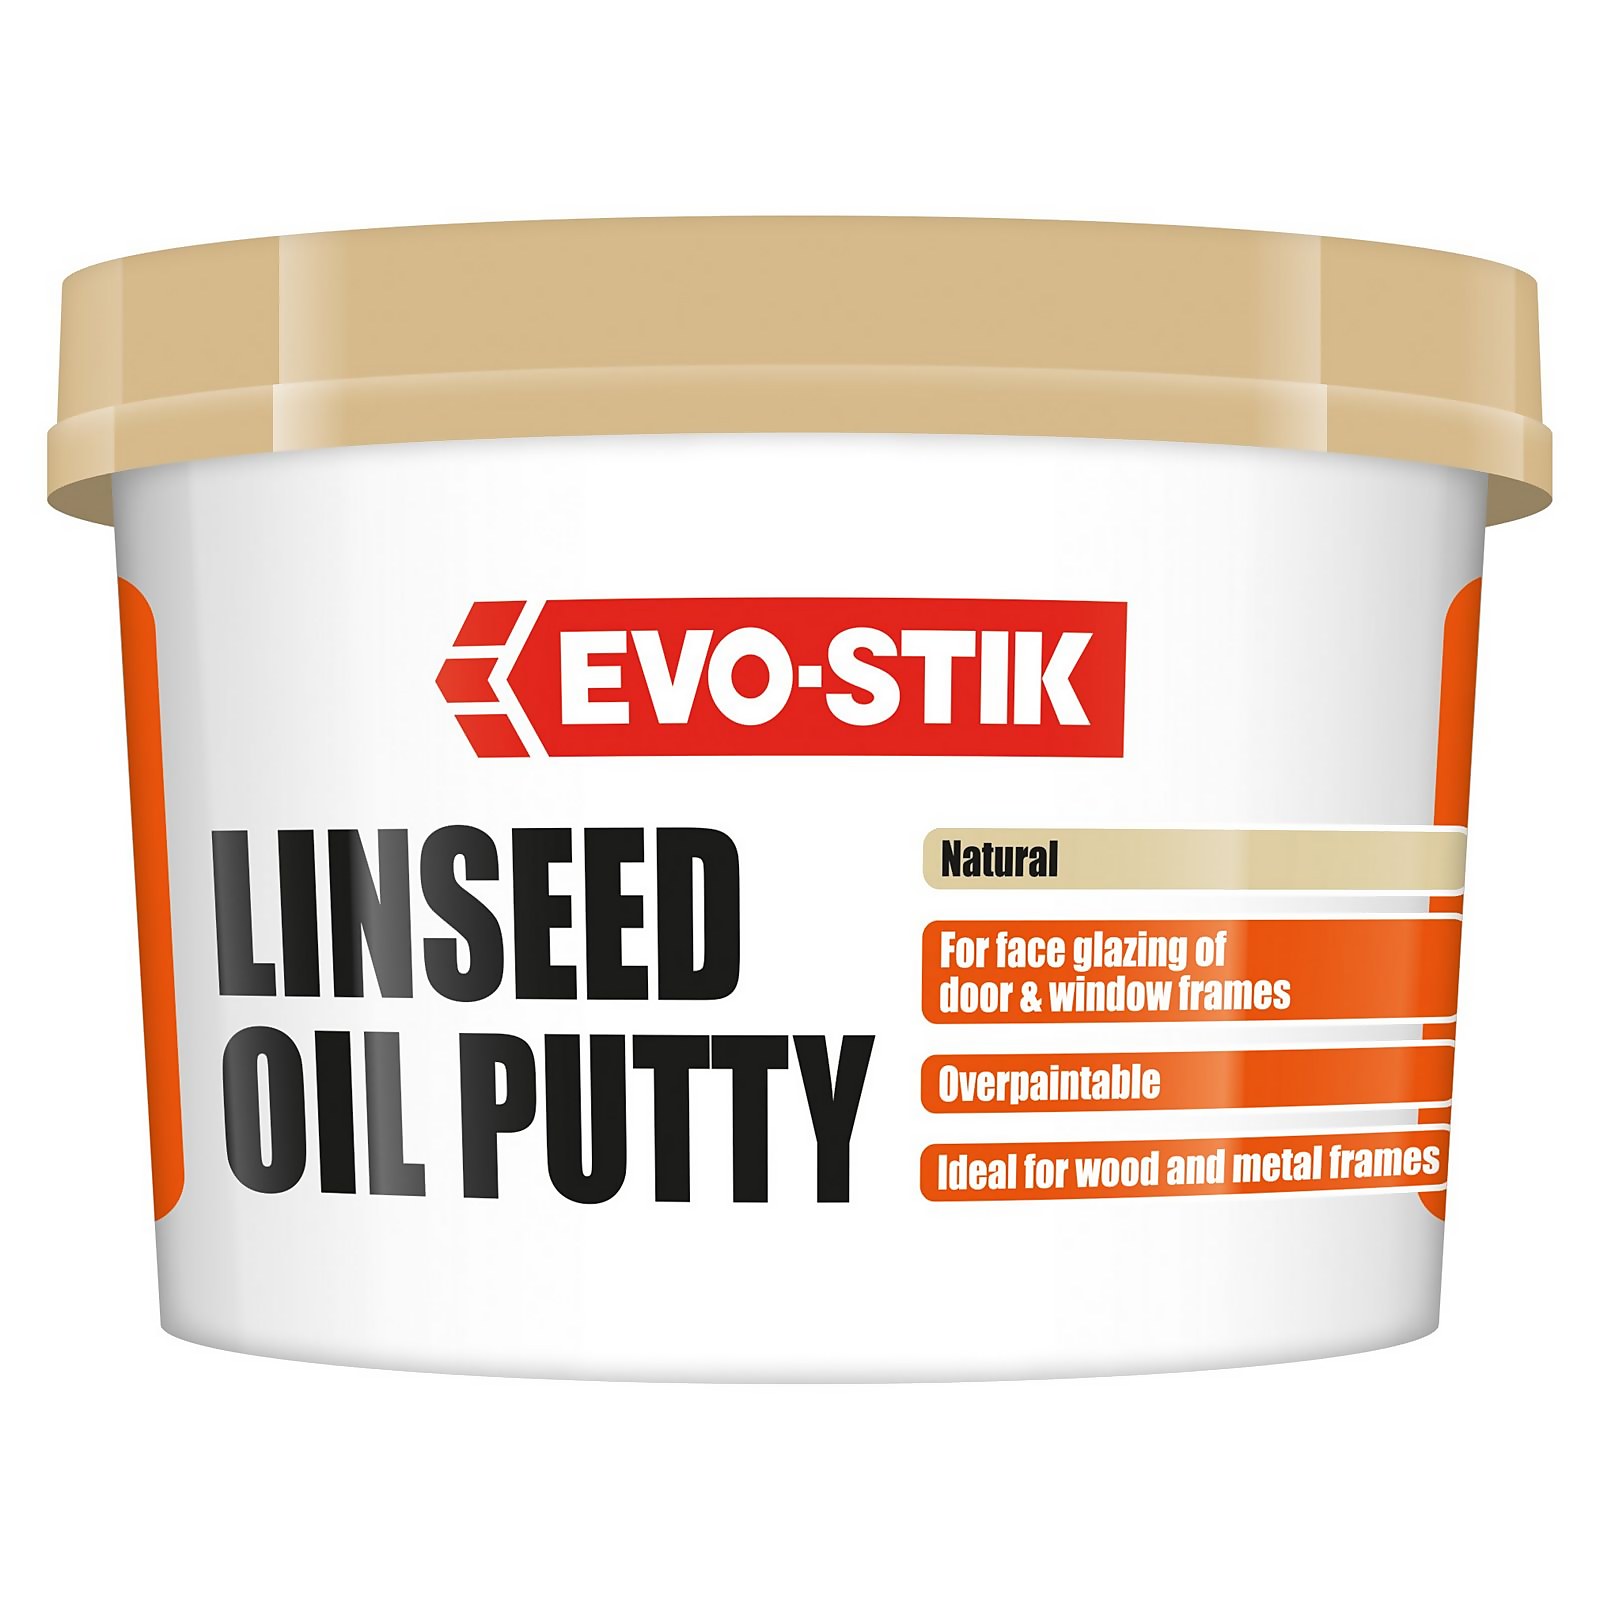 Photo of Evo-stik Linseed Oil Putty Natural - 1kg